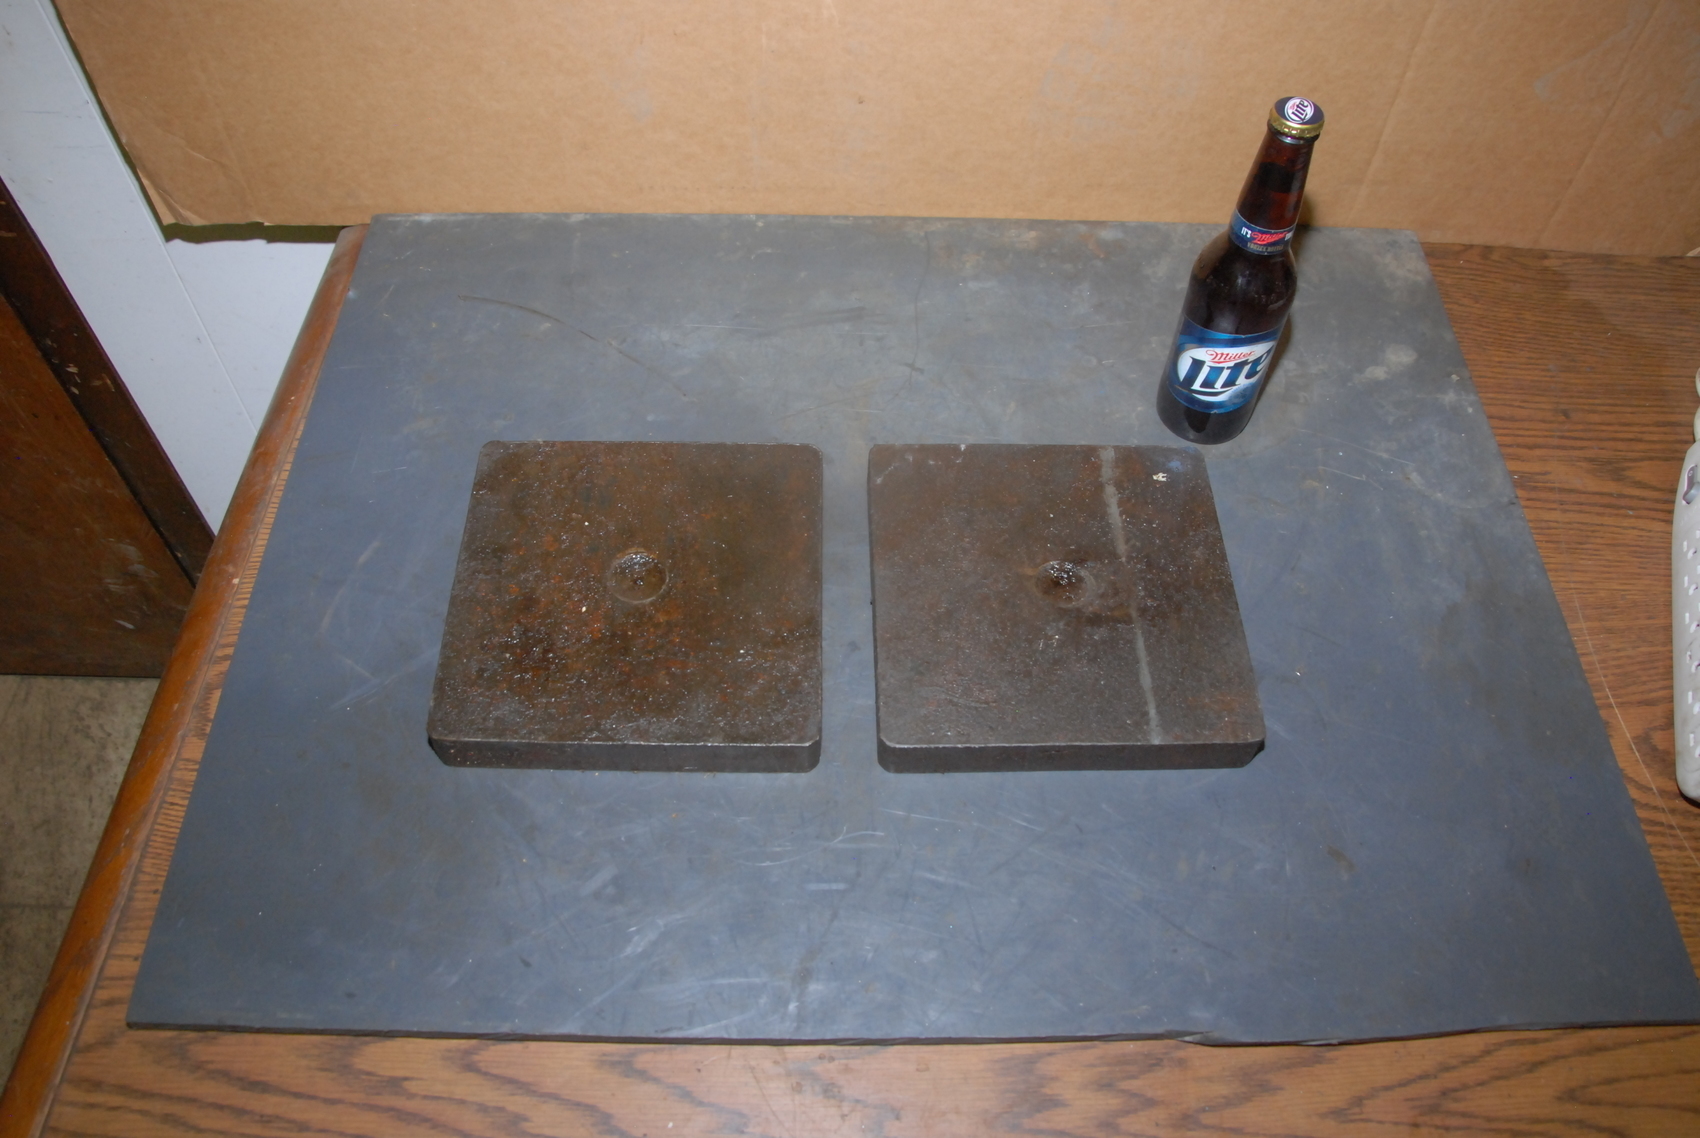 Lot of 2 steel Plate for blacksmith anvil,40 lbs,8x8x1-1/8"